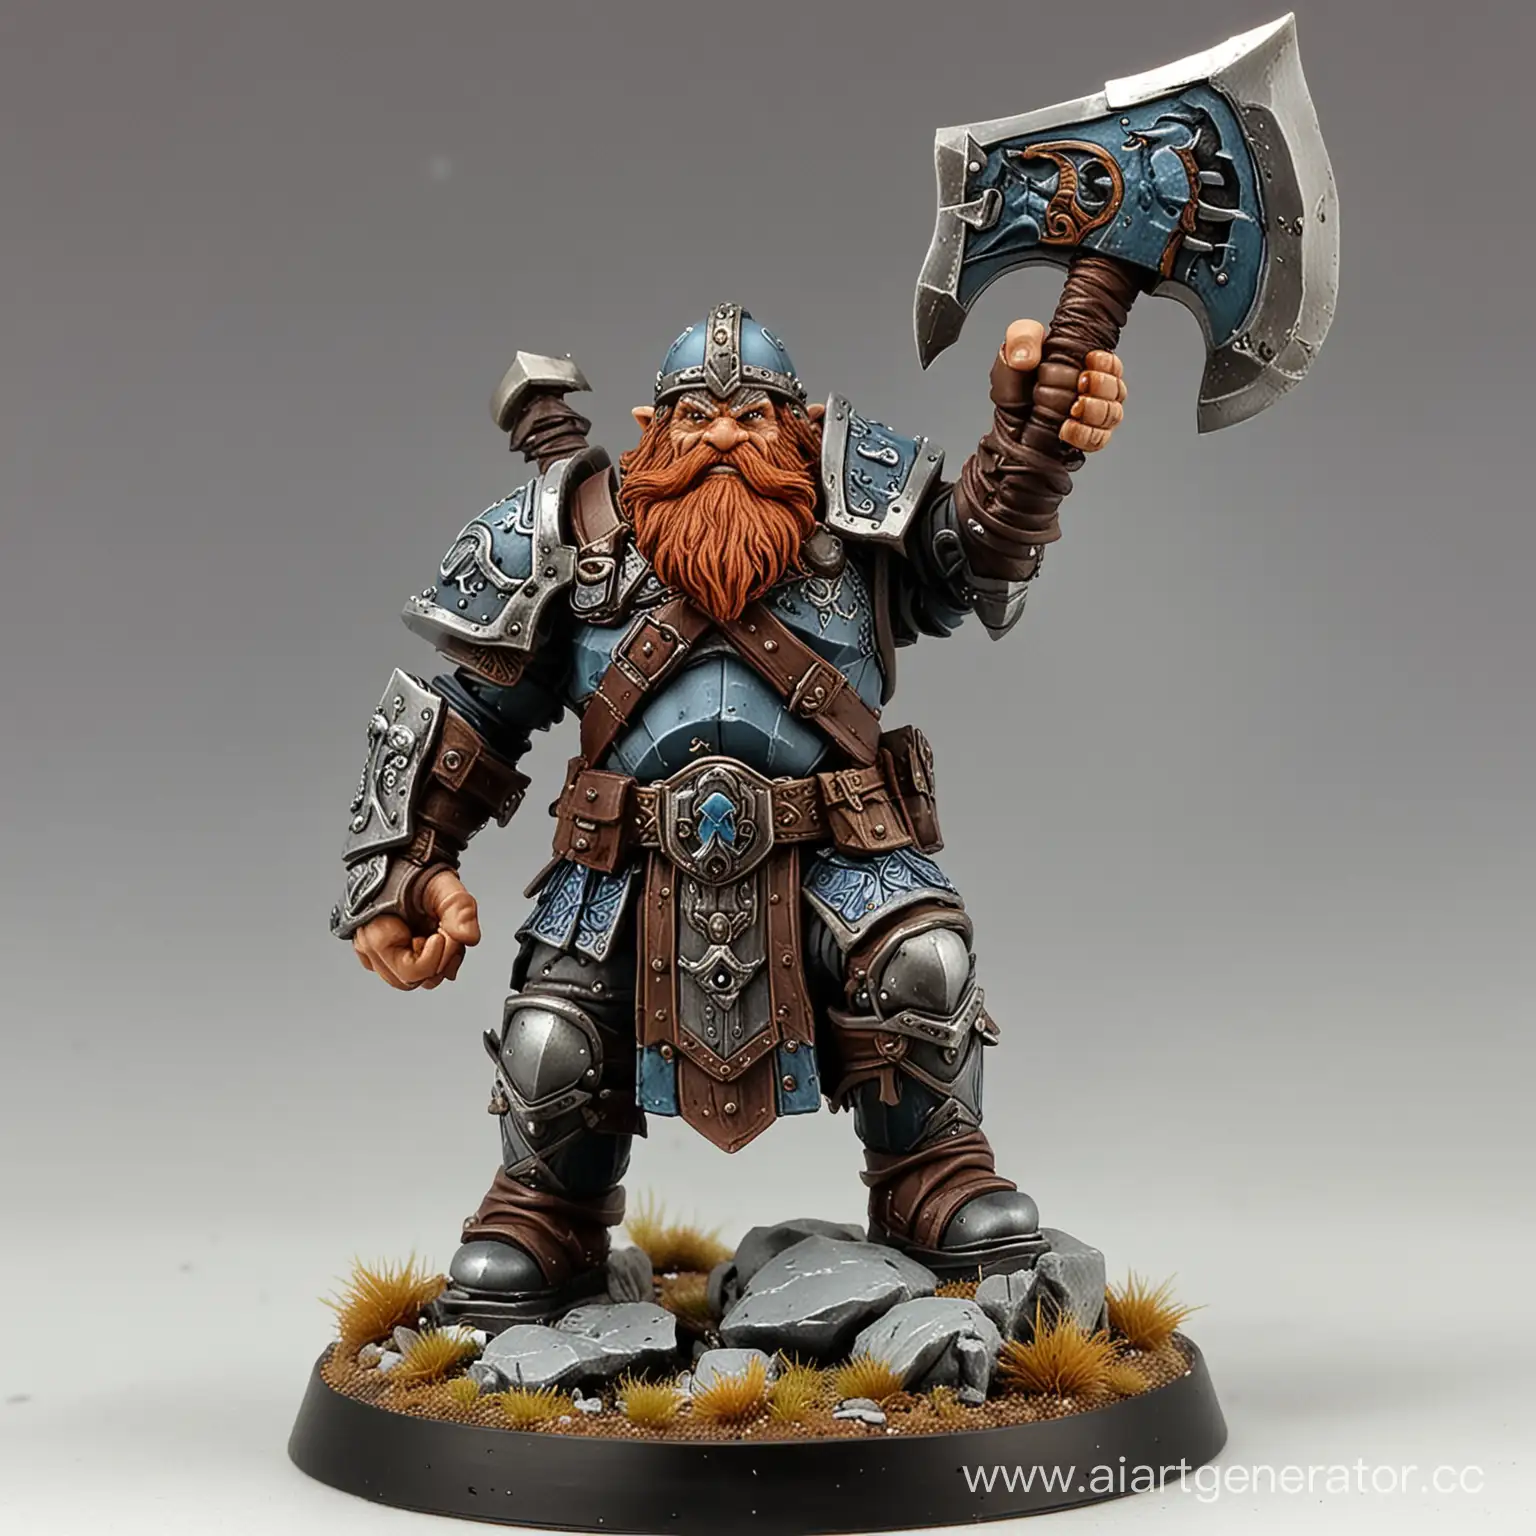 Dwarf echo knight with great axe
